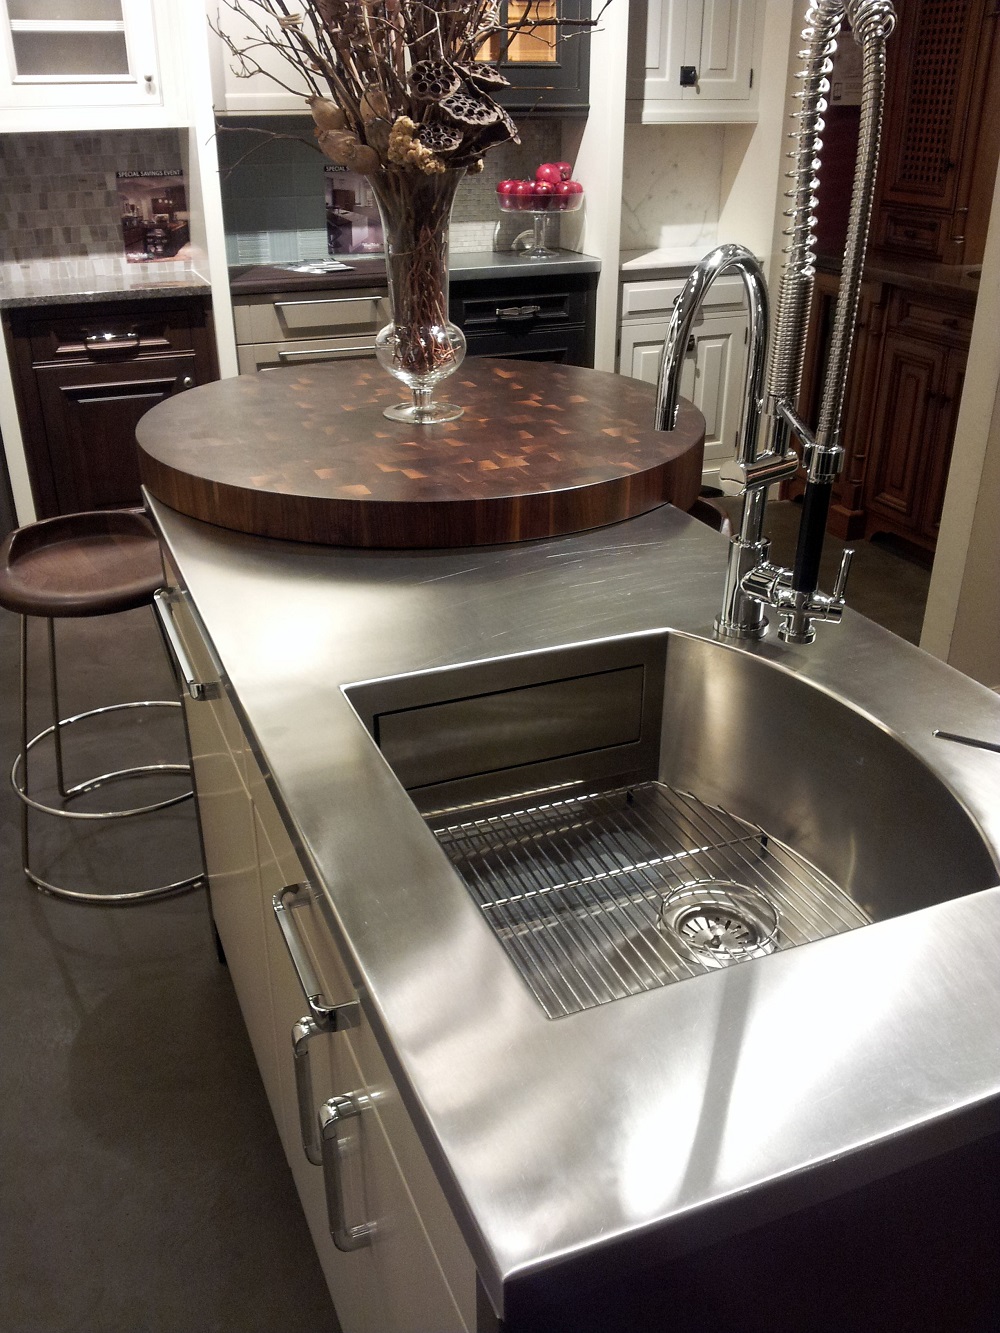 c6-1 Cool countertop ideas for you to create that stellar kitchen